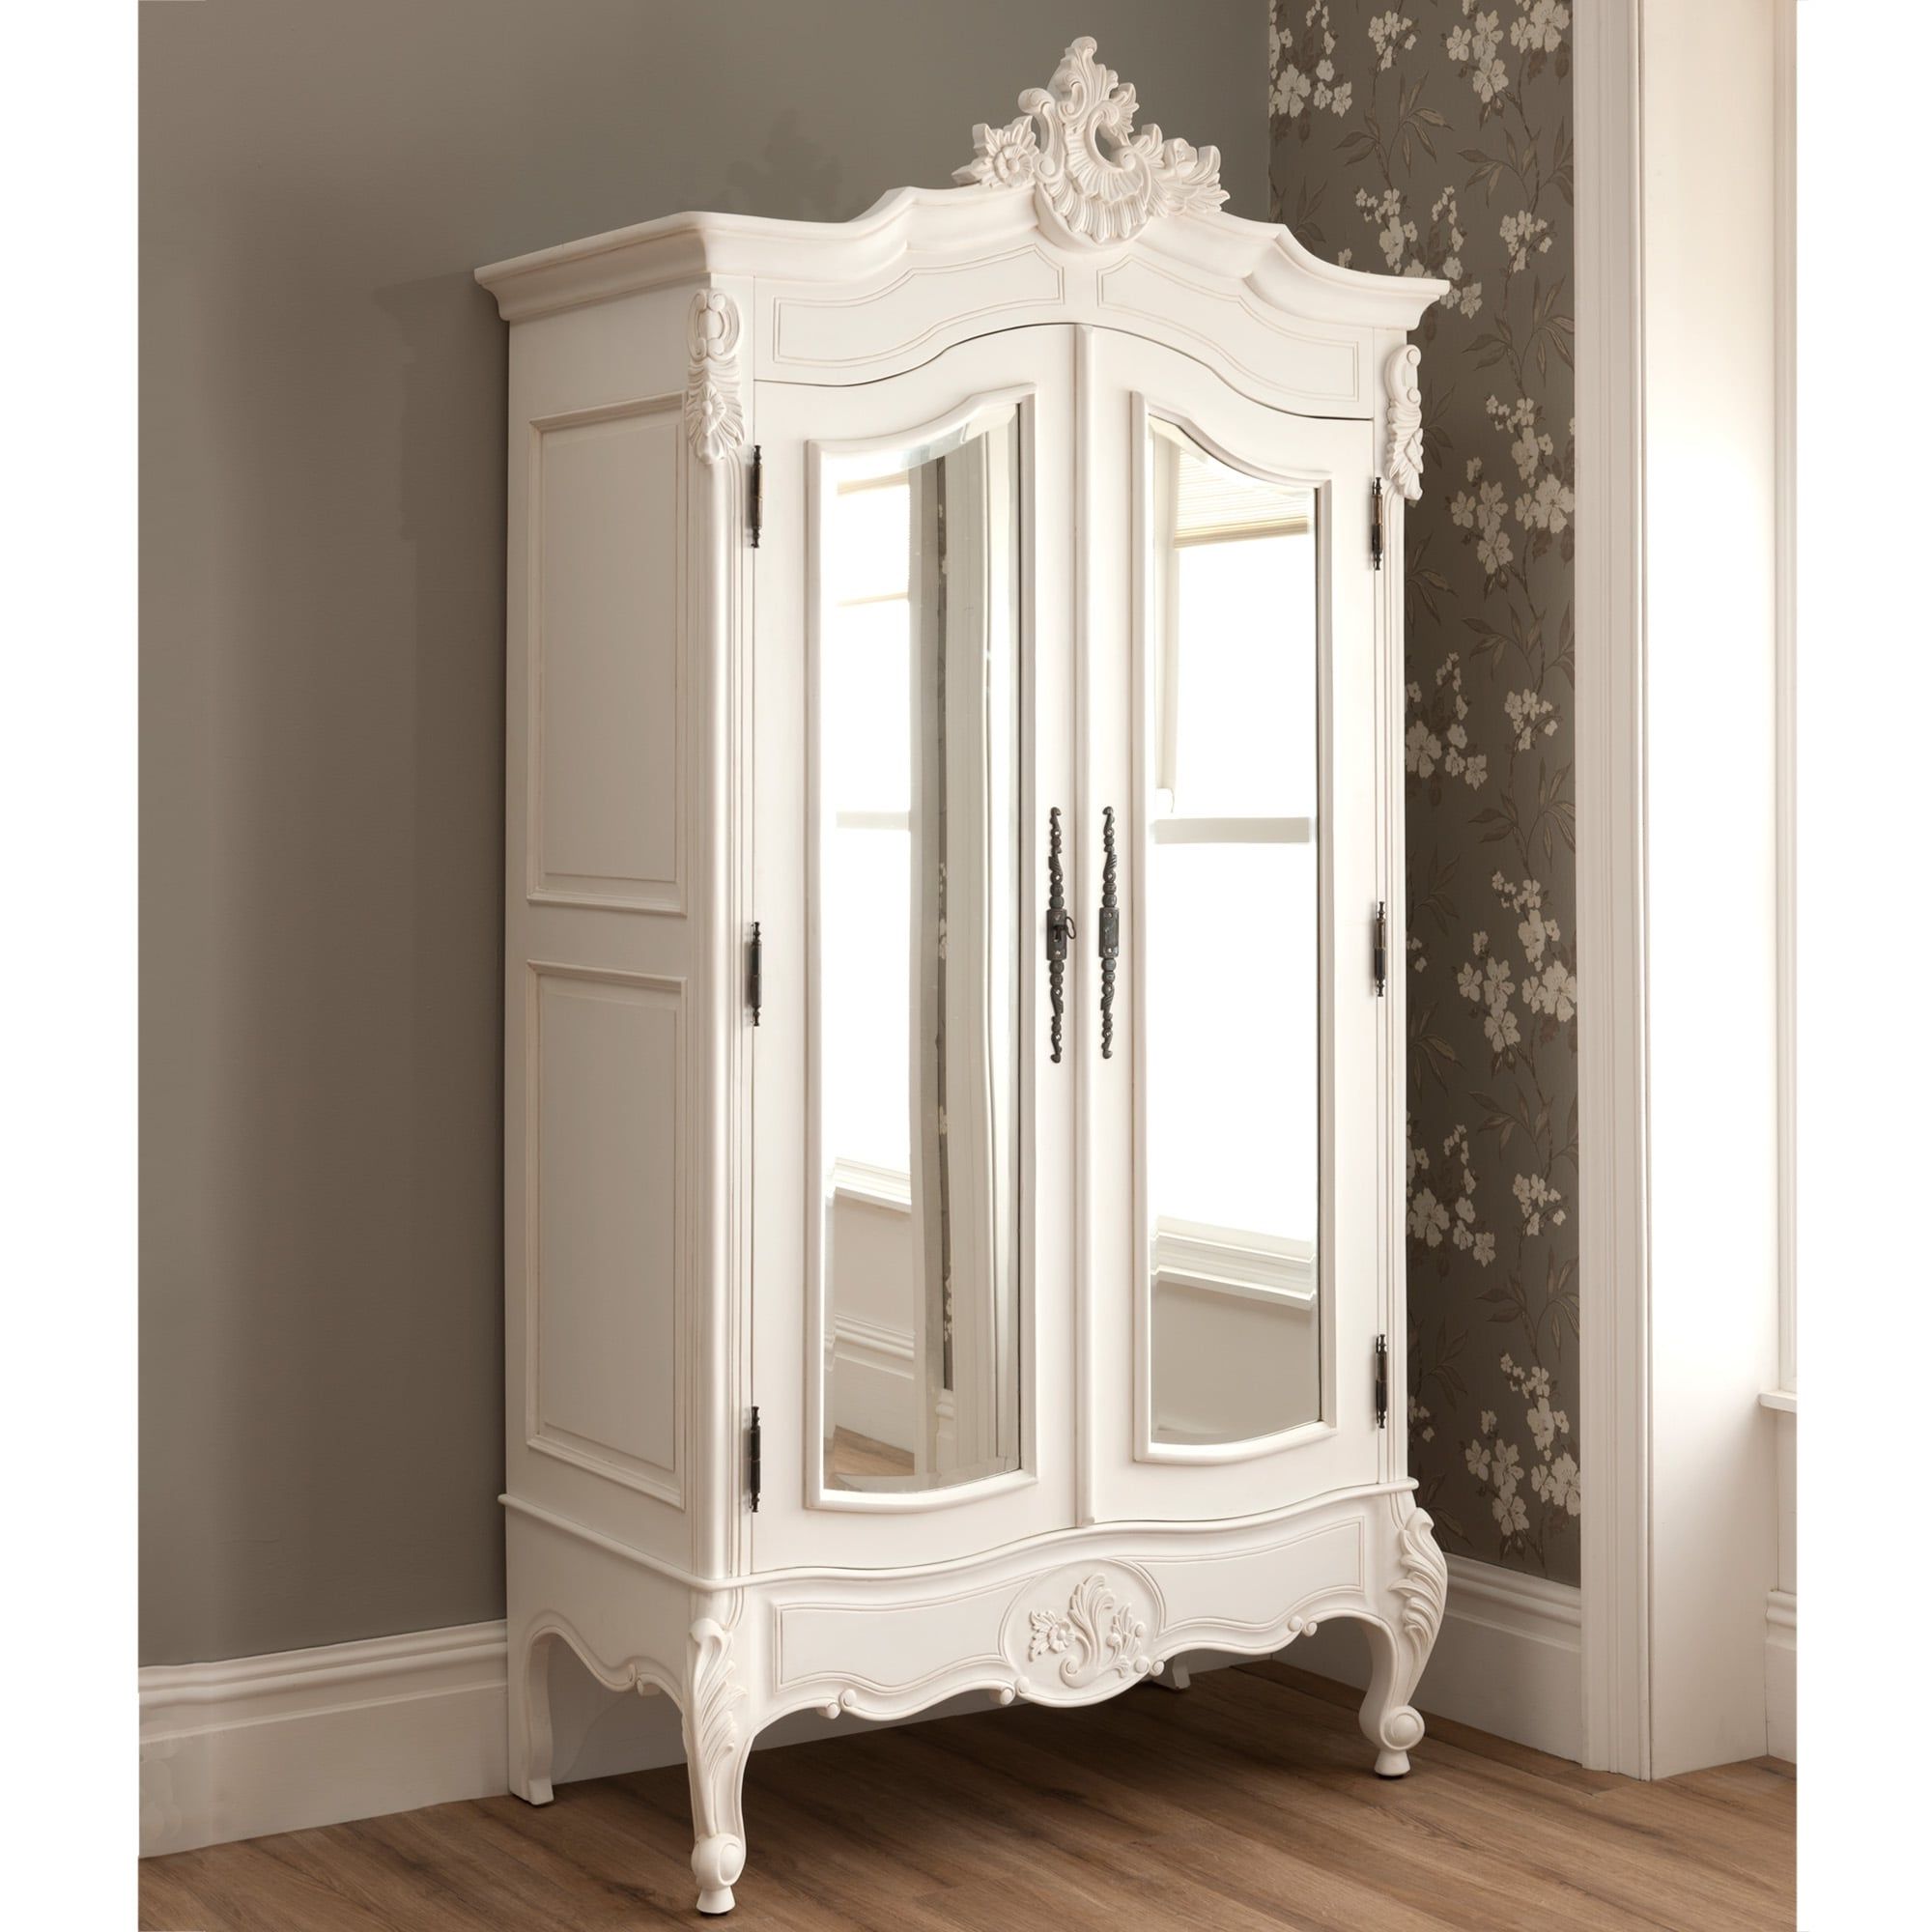 La Rochelle Antique French Mirrored 2 Door Wardrobe With Regard To French Style White Wardrobes (View 15 of 20)